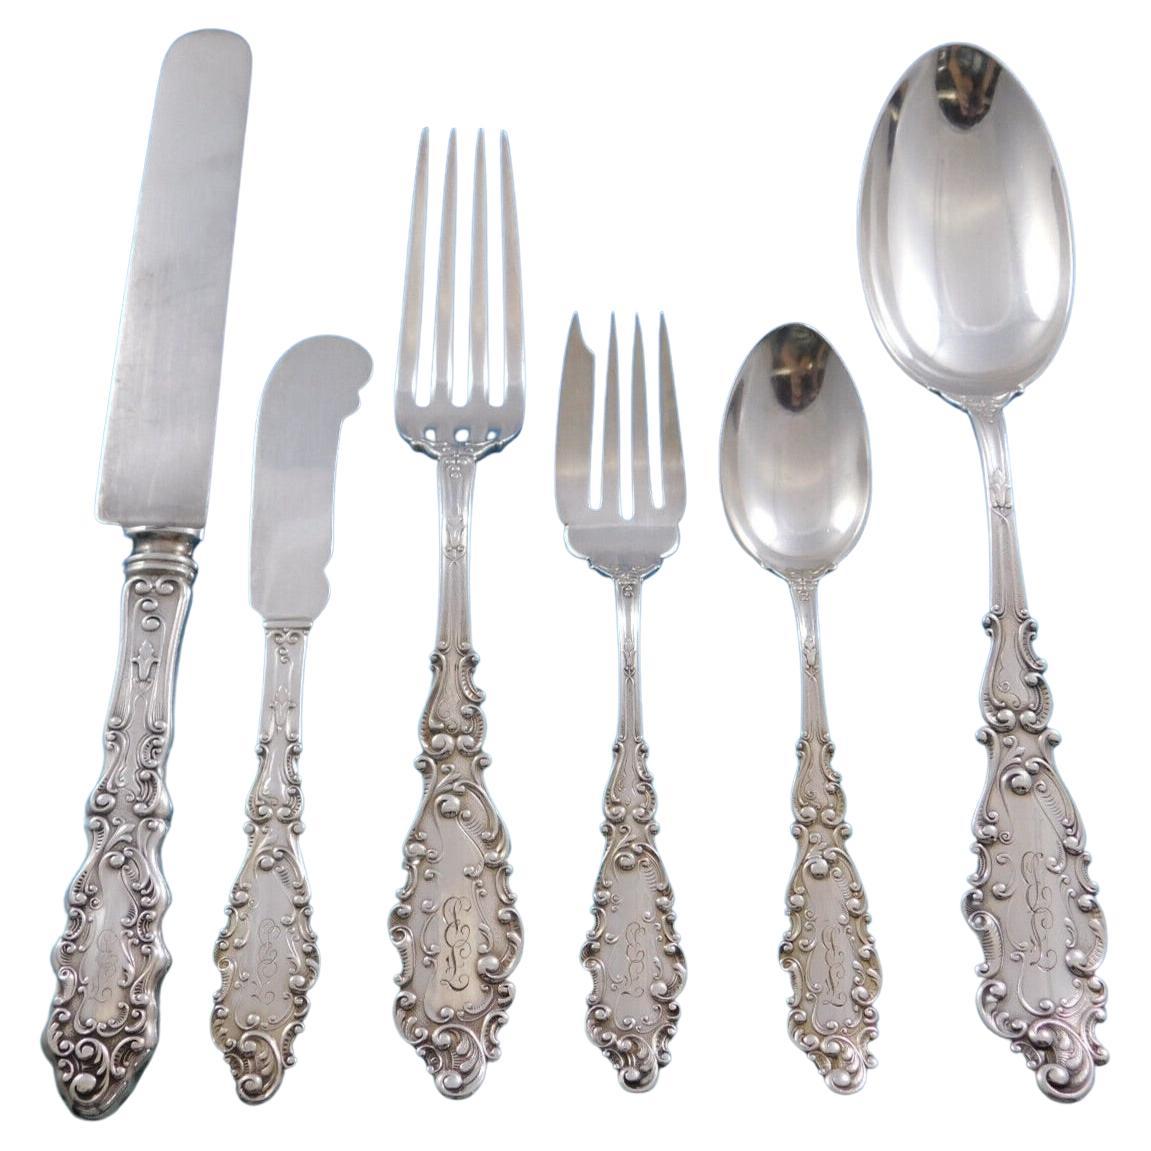 Luxembourg by Gorham Sterling Silver Flatware Set 8 Service 48 Pcs Dinner For Sale